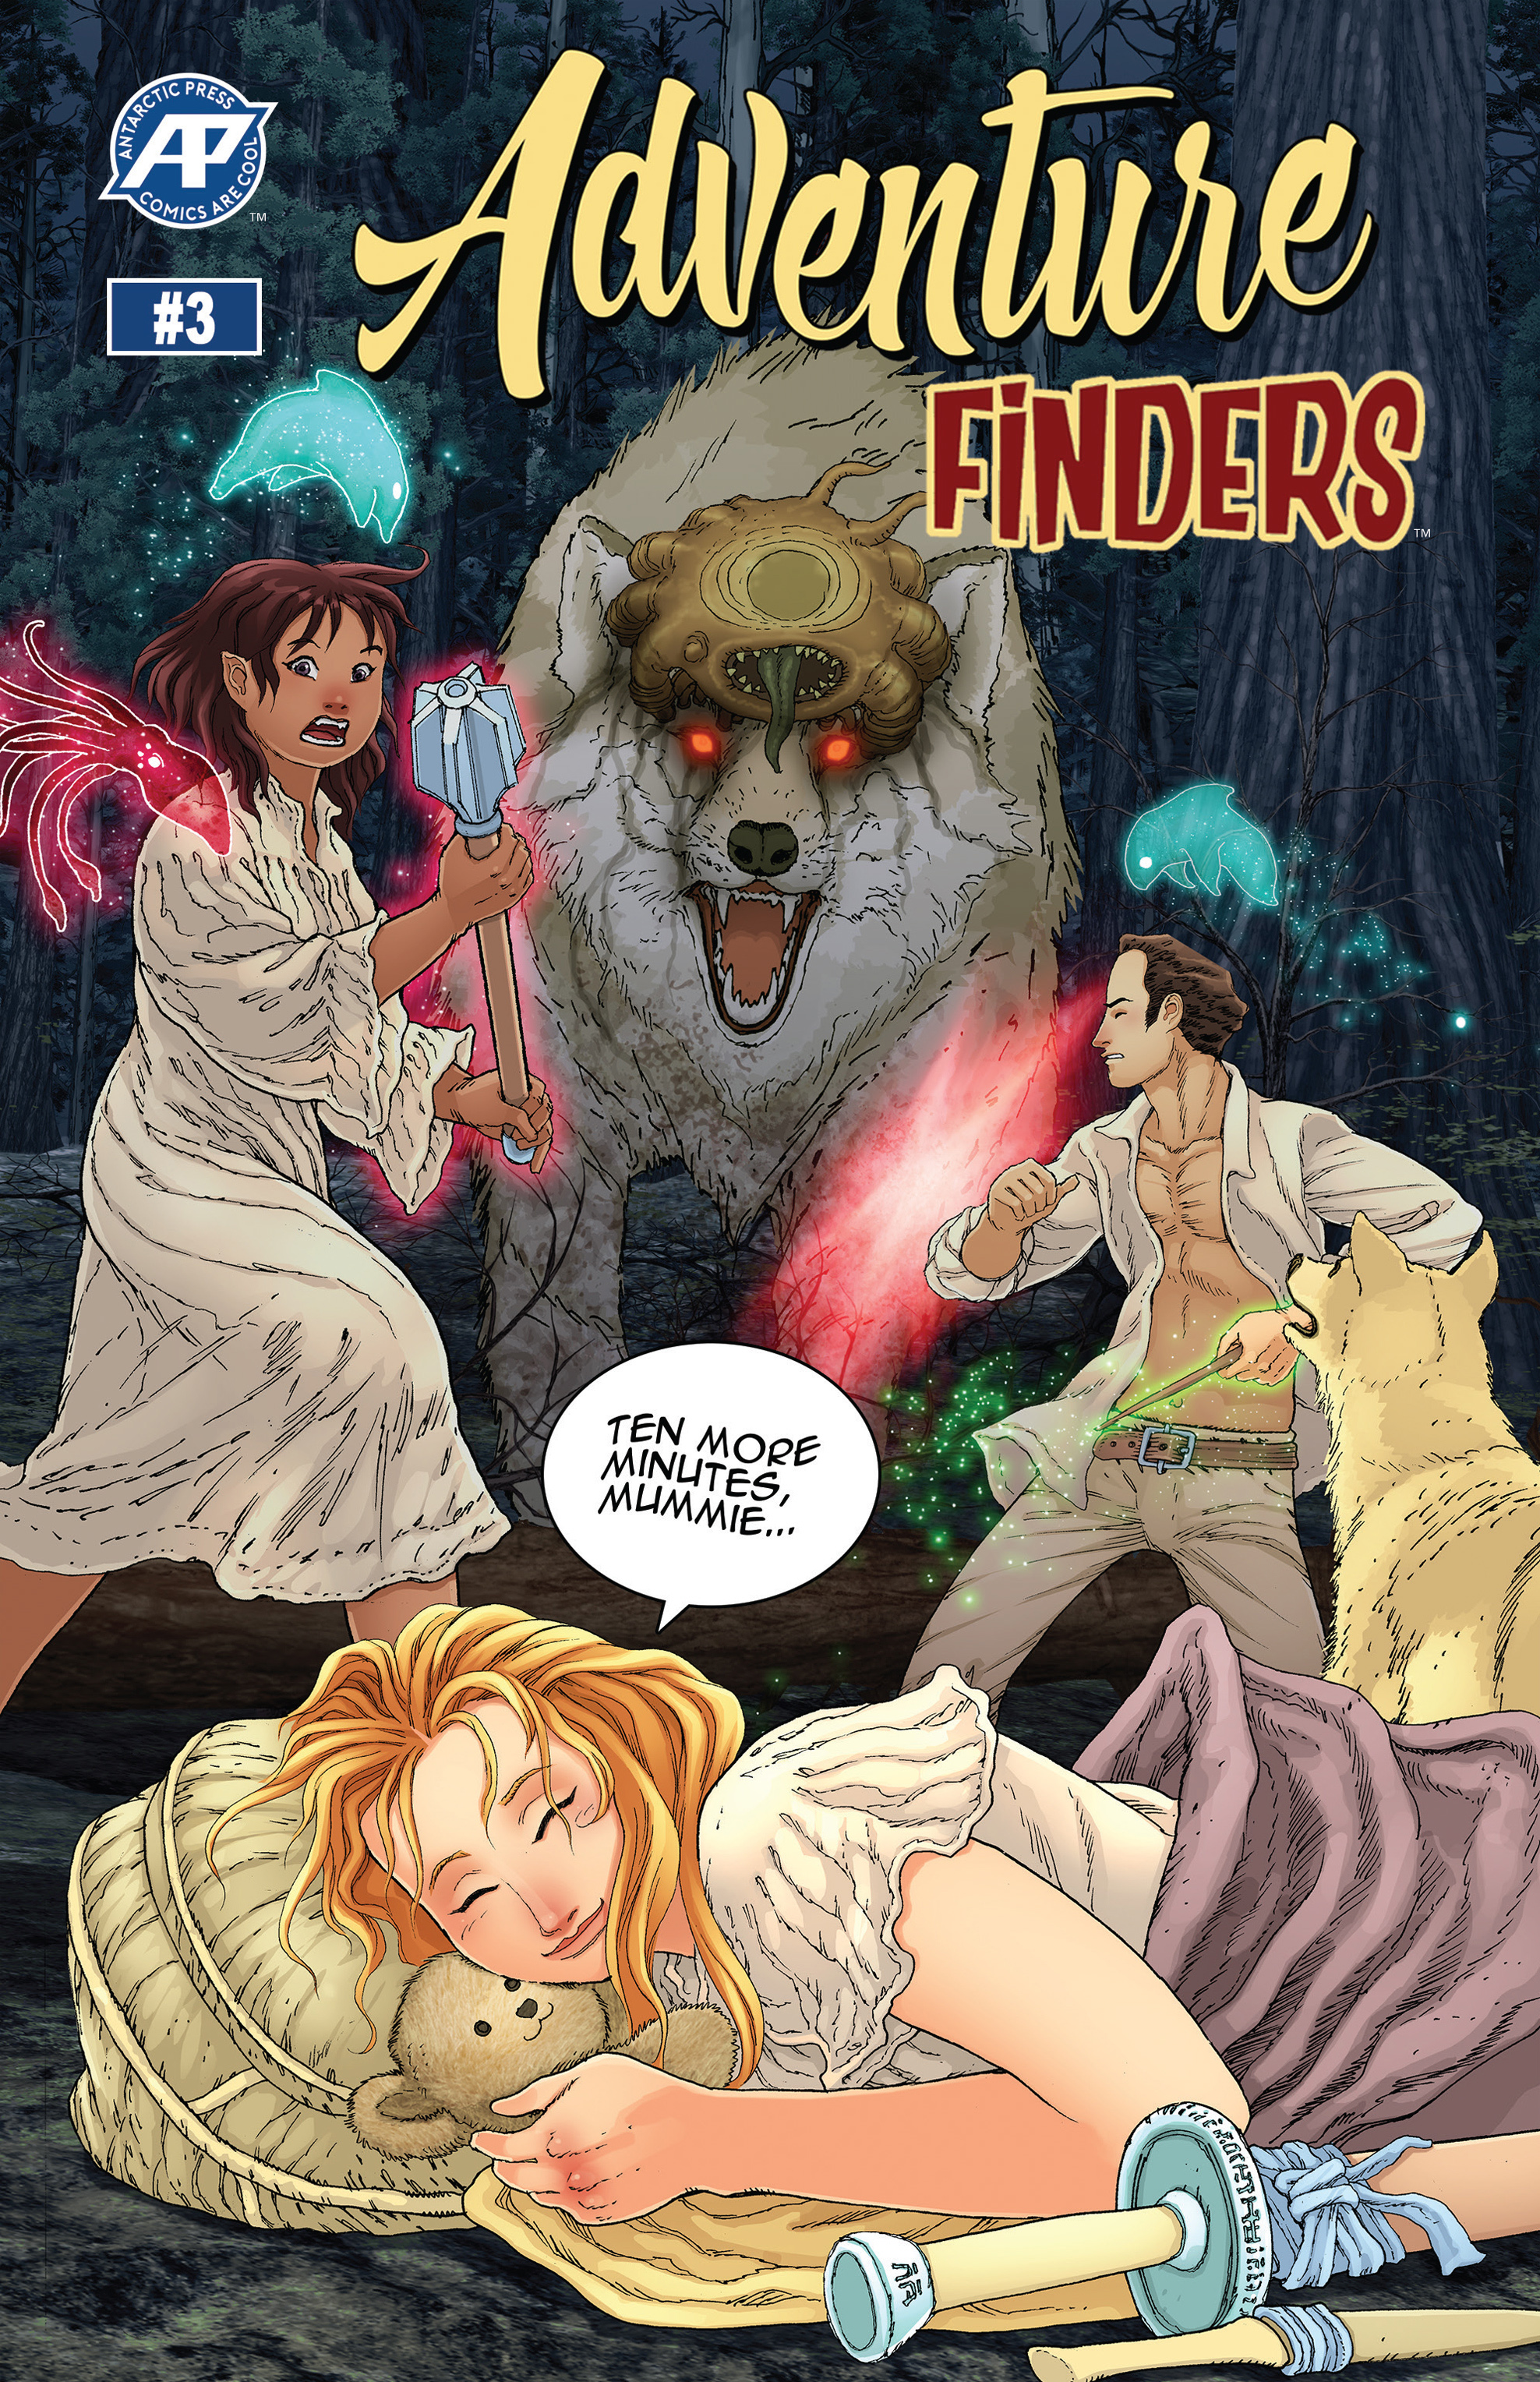 Read online Adventure Finders comic -  Issue #3 - 1